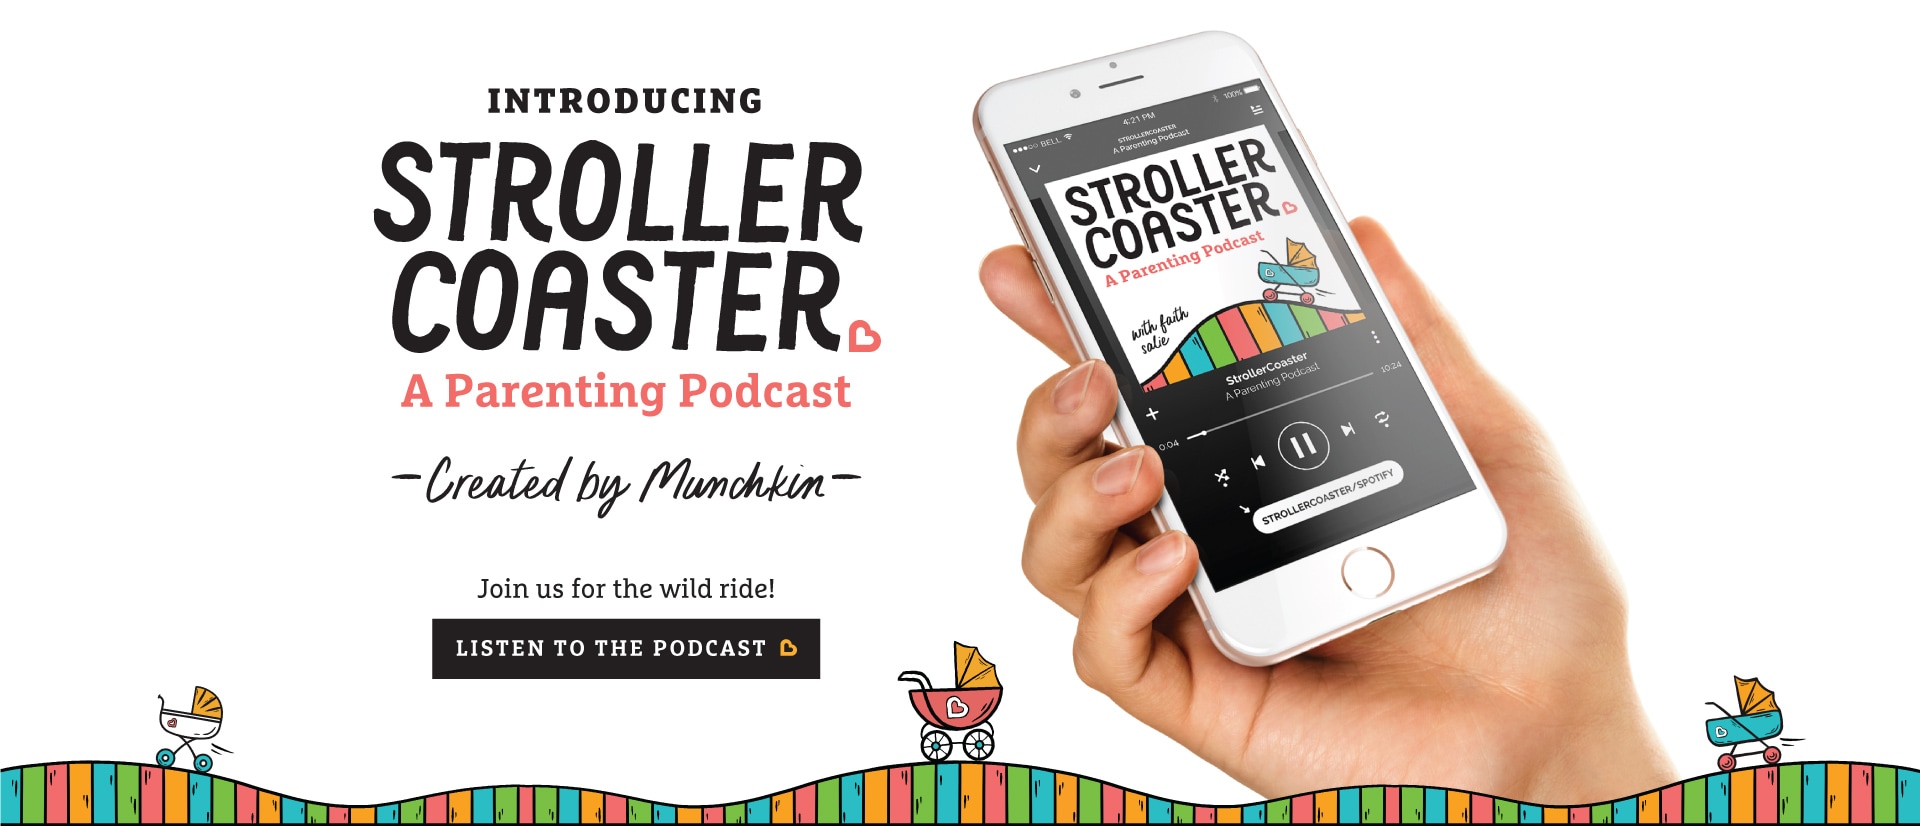 Introducing StrollerCoaster: A Parenting Podcast. Created by Munchkin. Join us for the wild ride! Listen to the trailer.